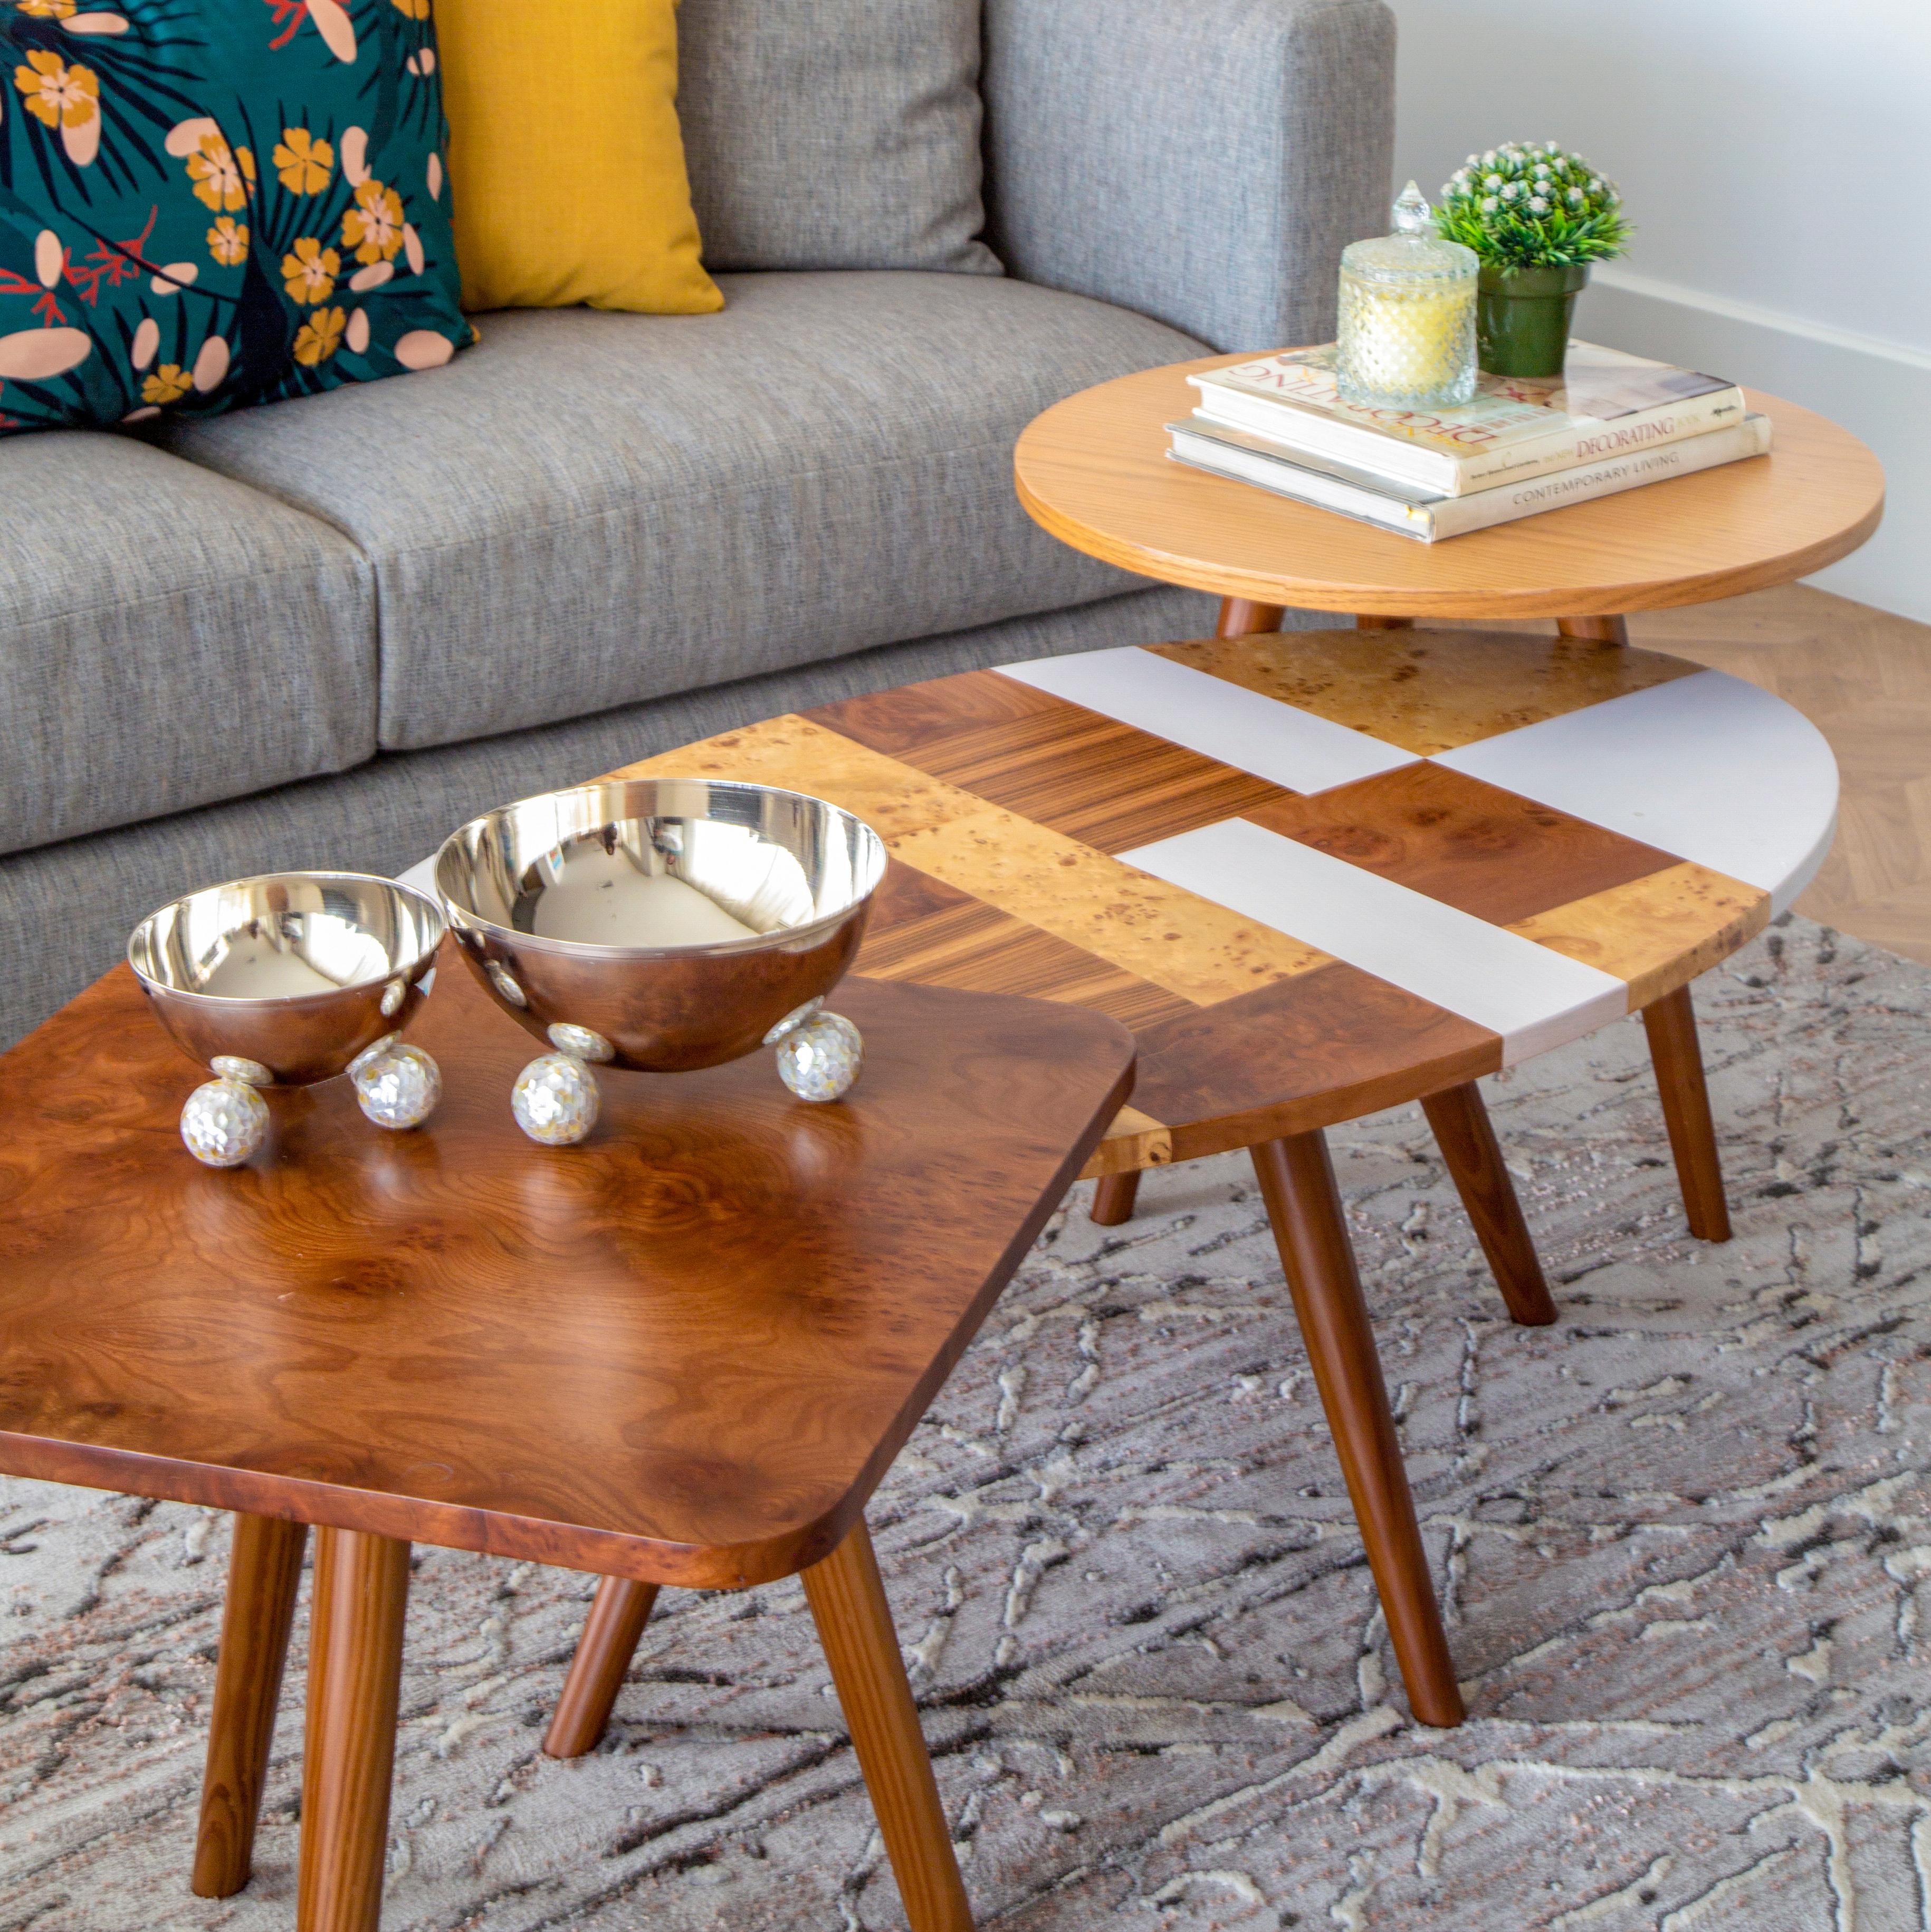 Hand-Crafted Patchwork Coffee Table with Maple, Zebra, Oak & Lacquered Veneers.
Our Patchwork coffee table set is hand-crafted with maple, zebra, oak and lacquered veneers to create a unique look. You can mix and match these tables to create a bold